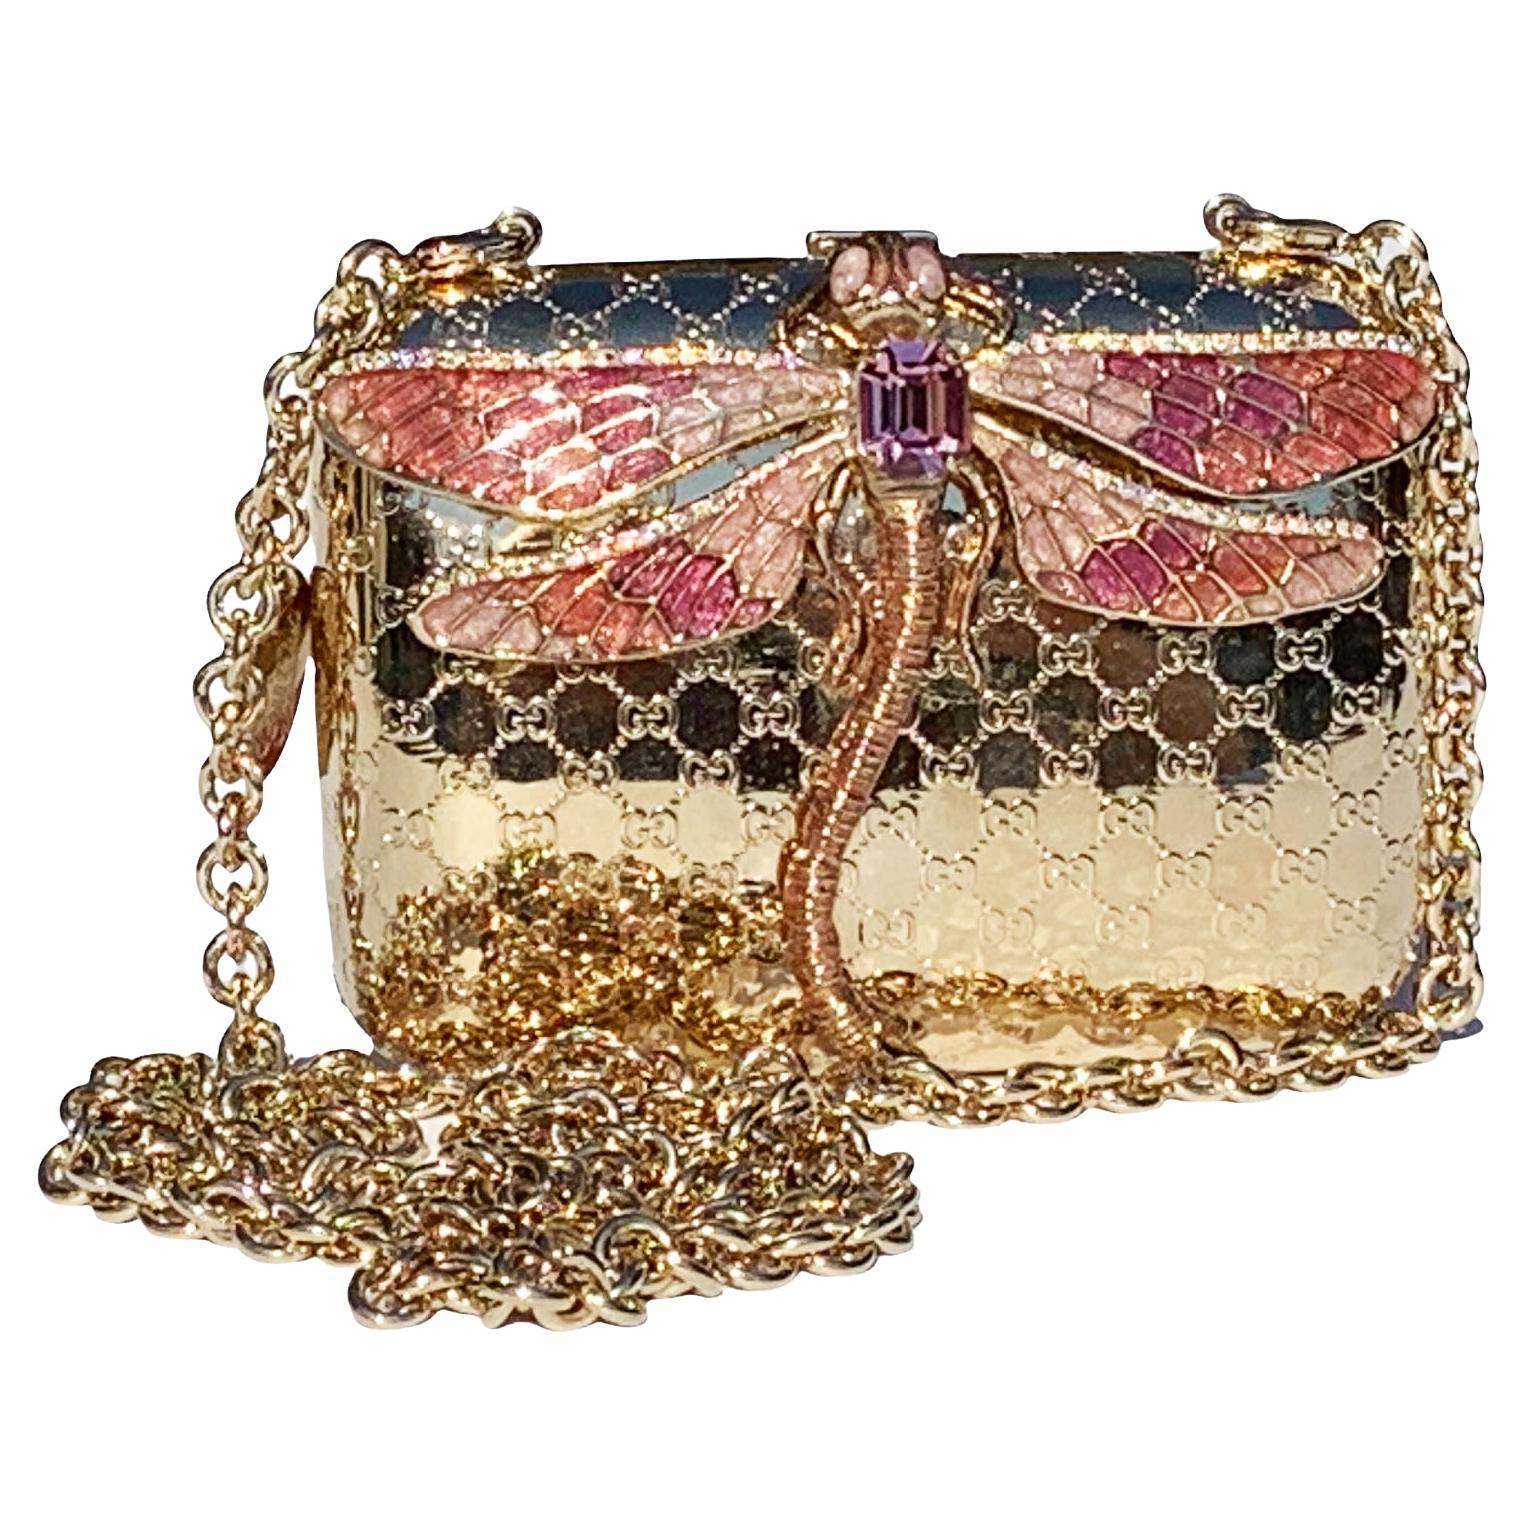 COLLECTIBLE TOM FORD for GUCCI EMBELLISHED GOLD CLUTCH BAG